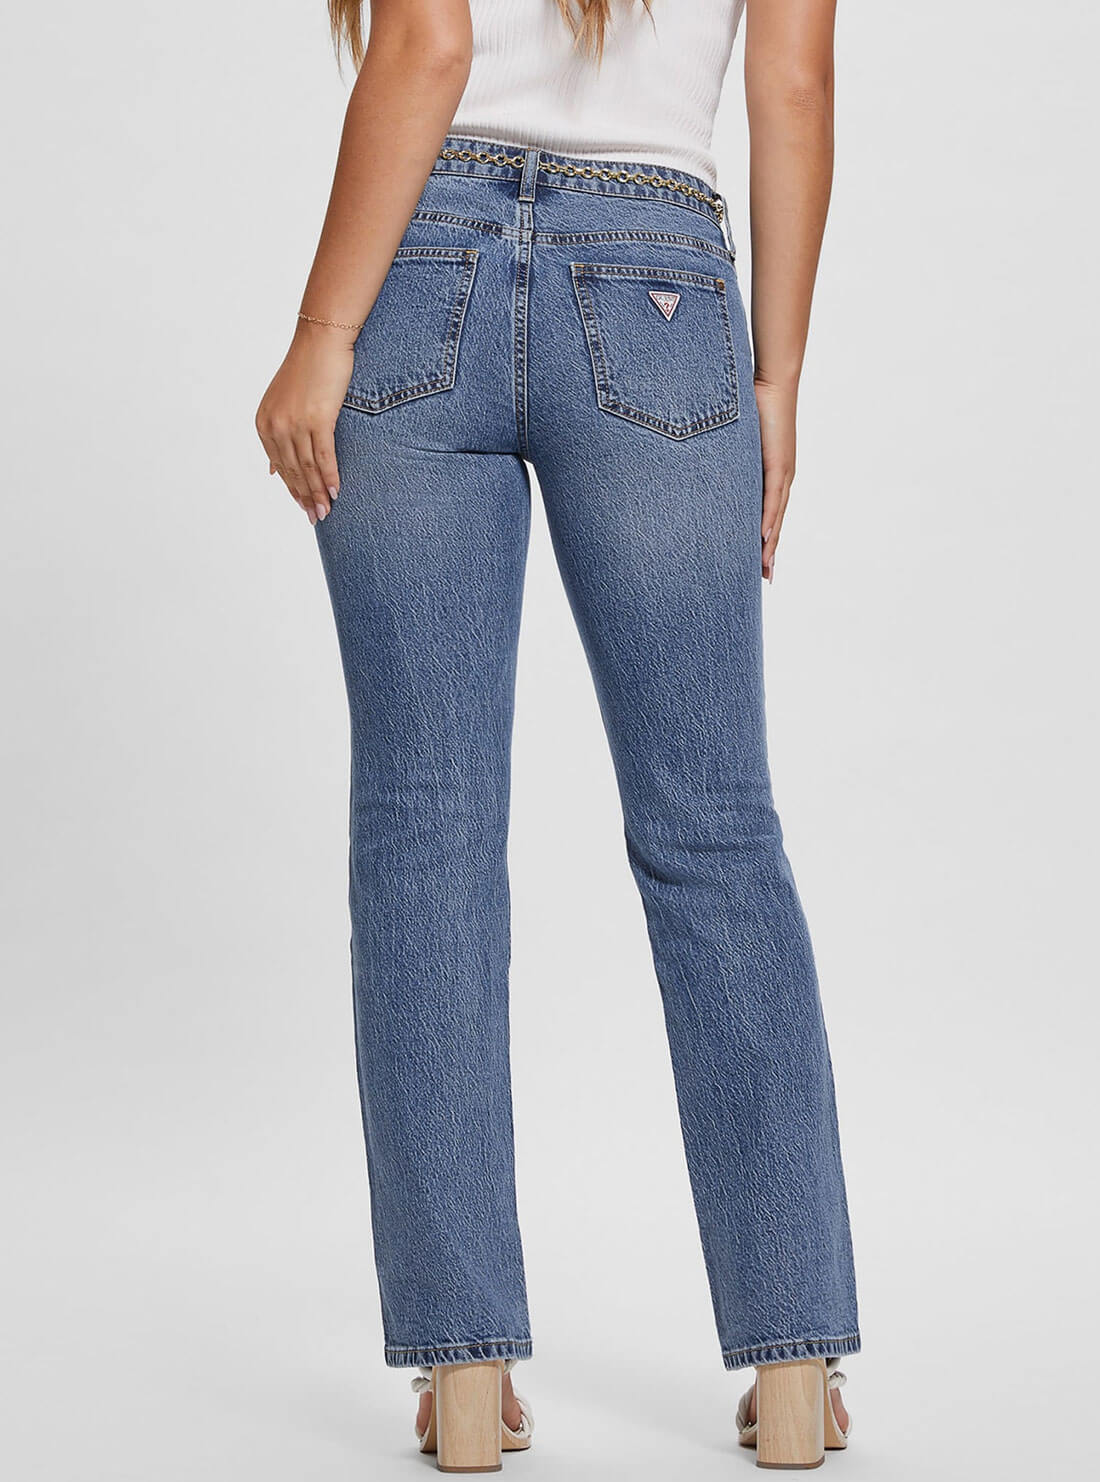 Mid-Rise G-Belt Sexy Straight Leg Denim Jeans In Lunar Blue Wash | GUESS Women's Apparel | back view